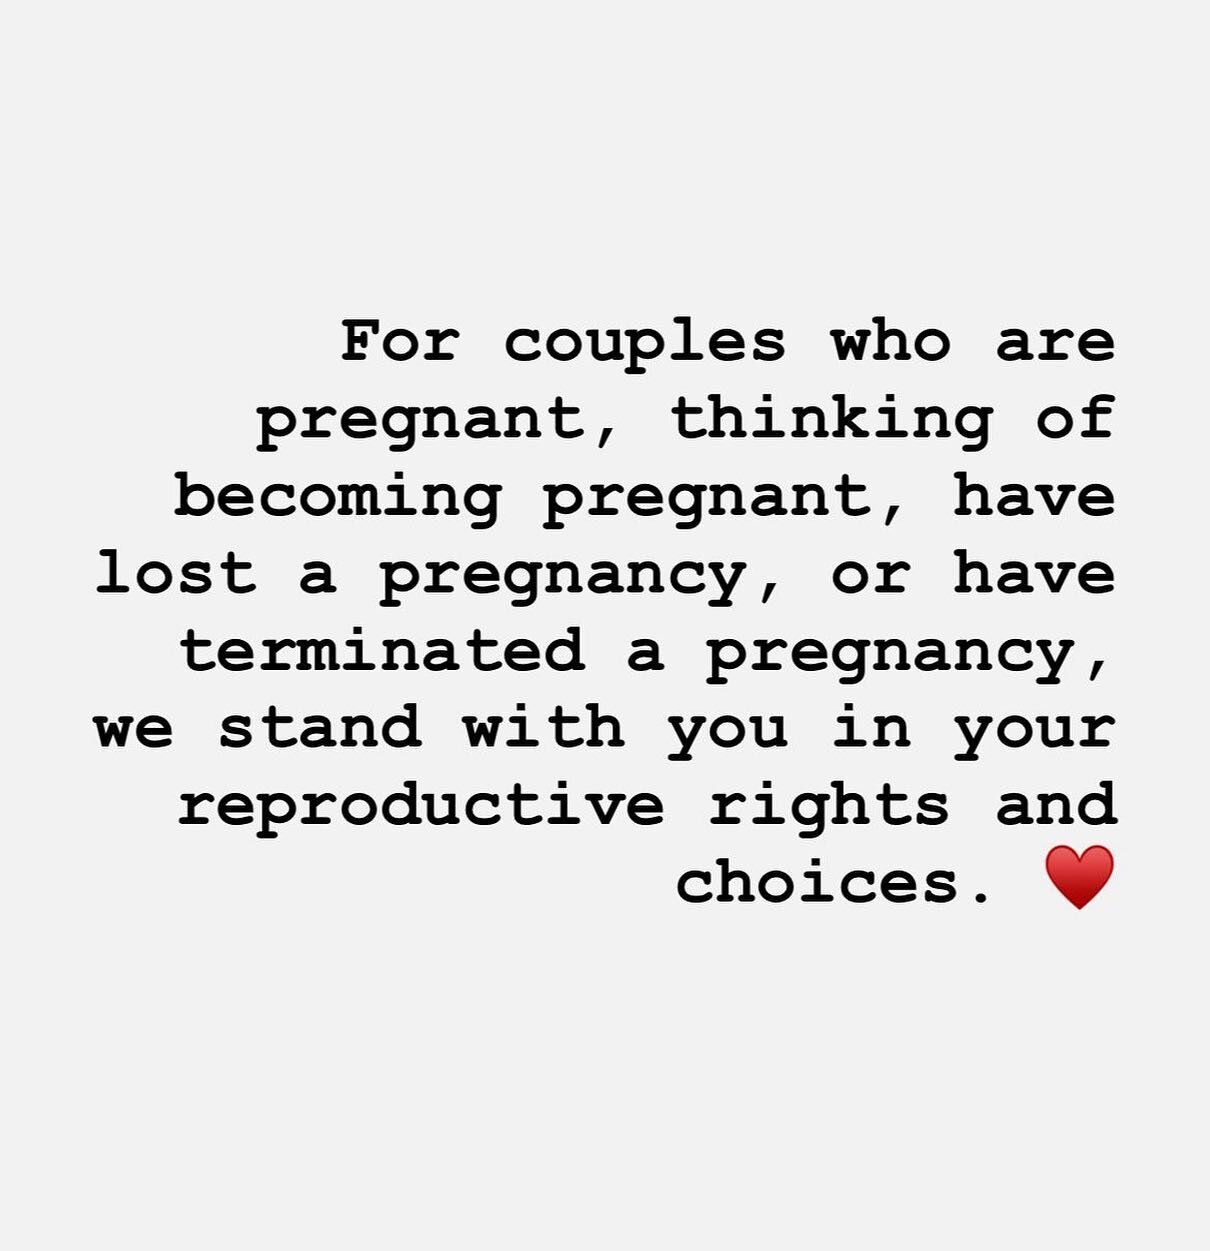 We support couples through heart-wrenching and heart-warming decisions regarding reproduction. Always.